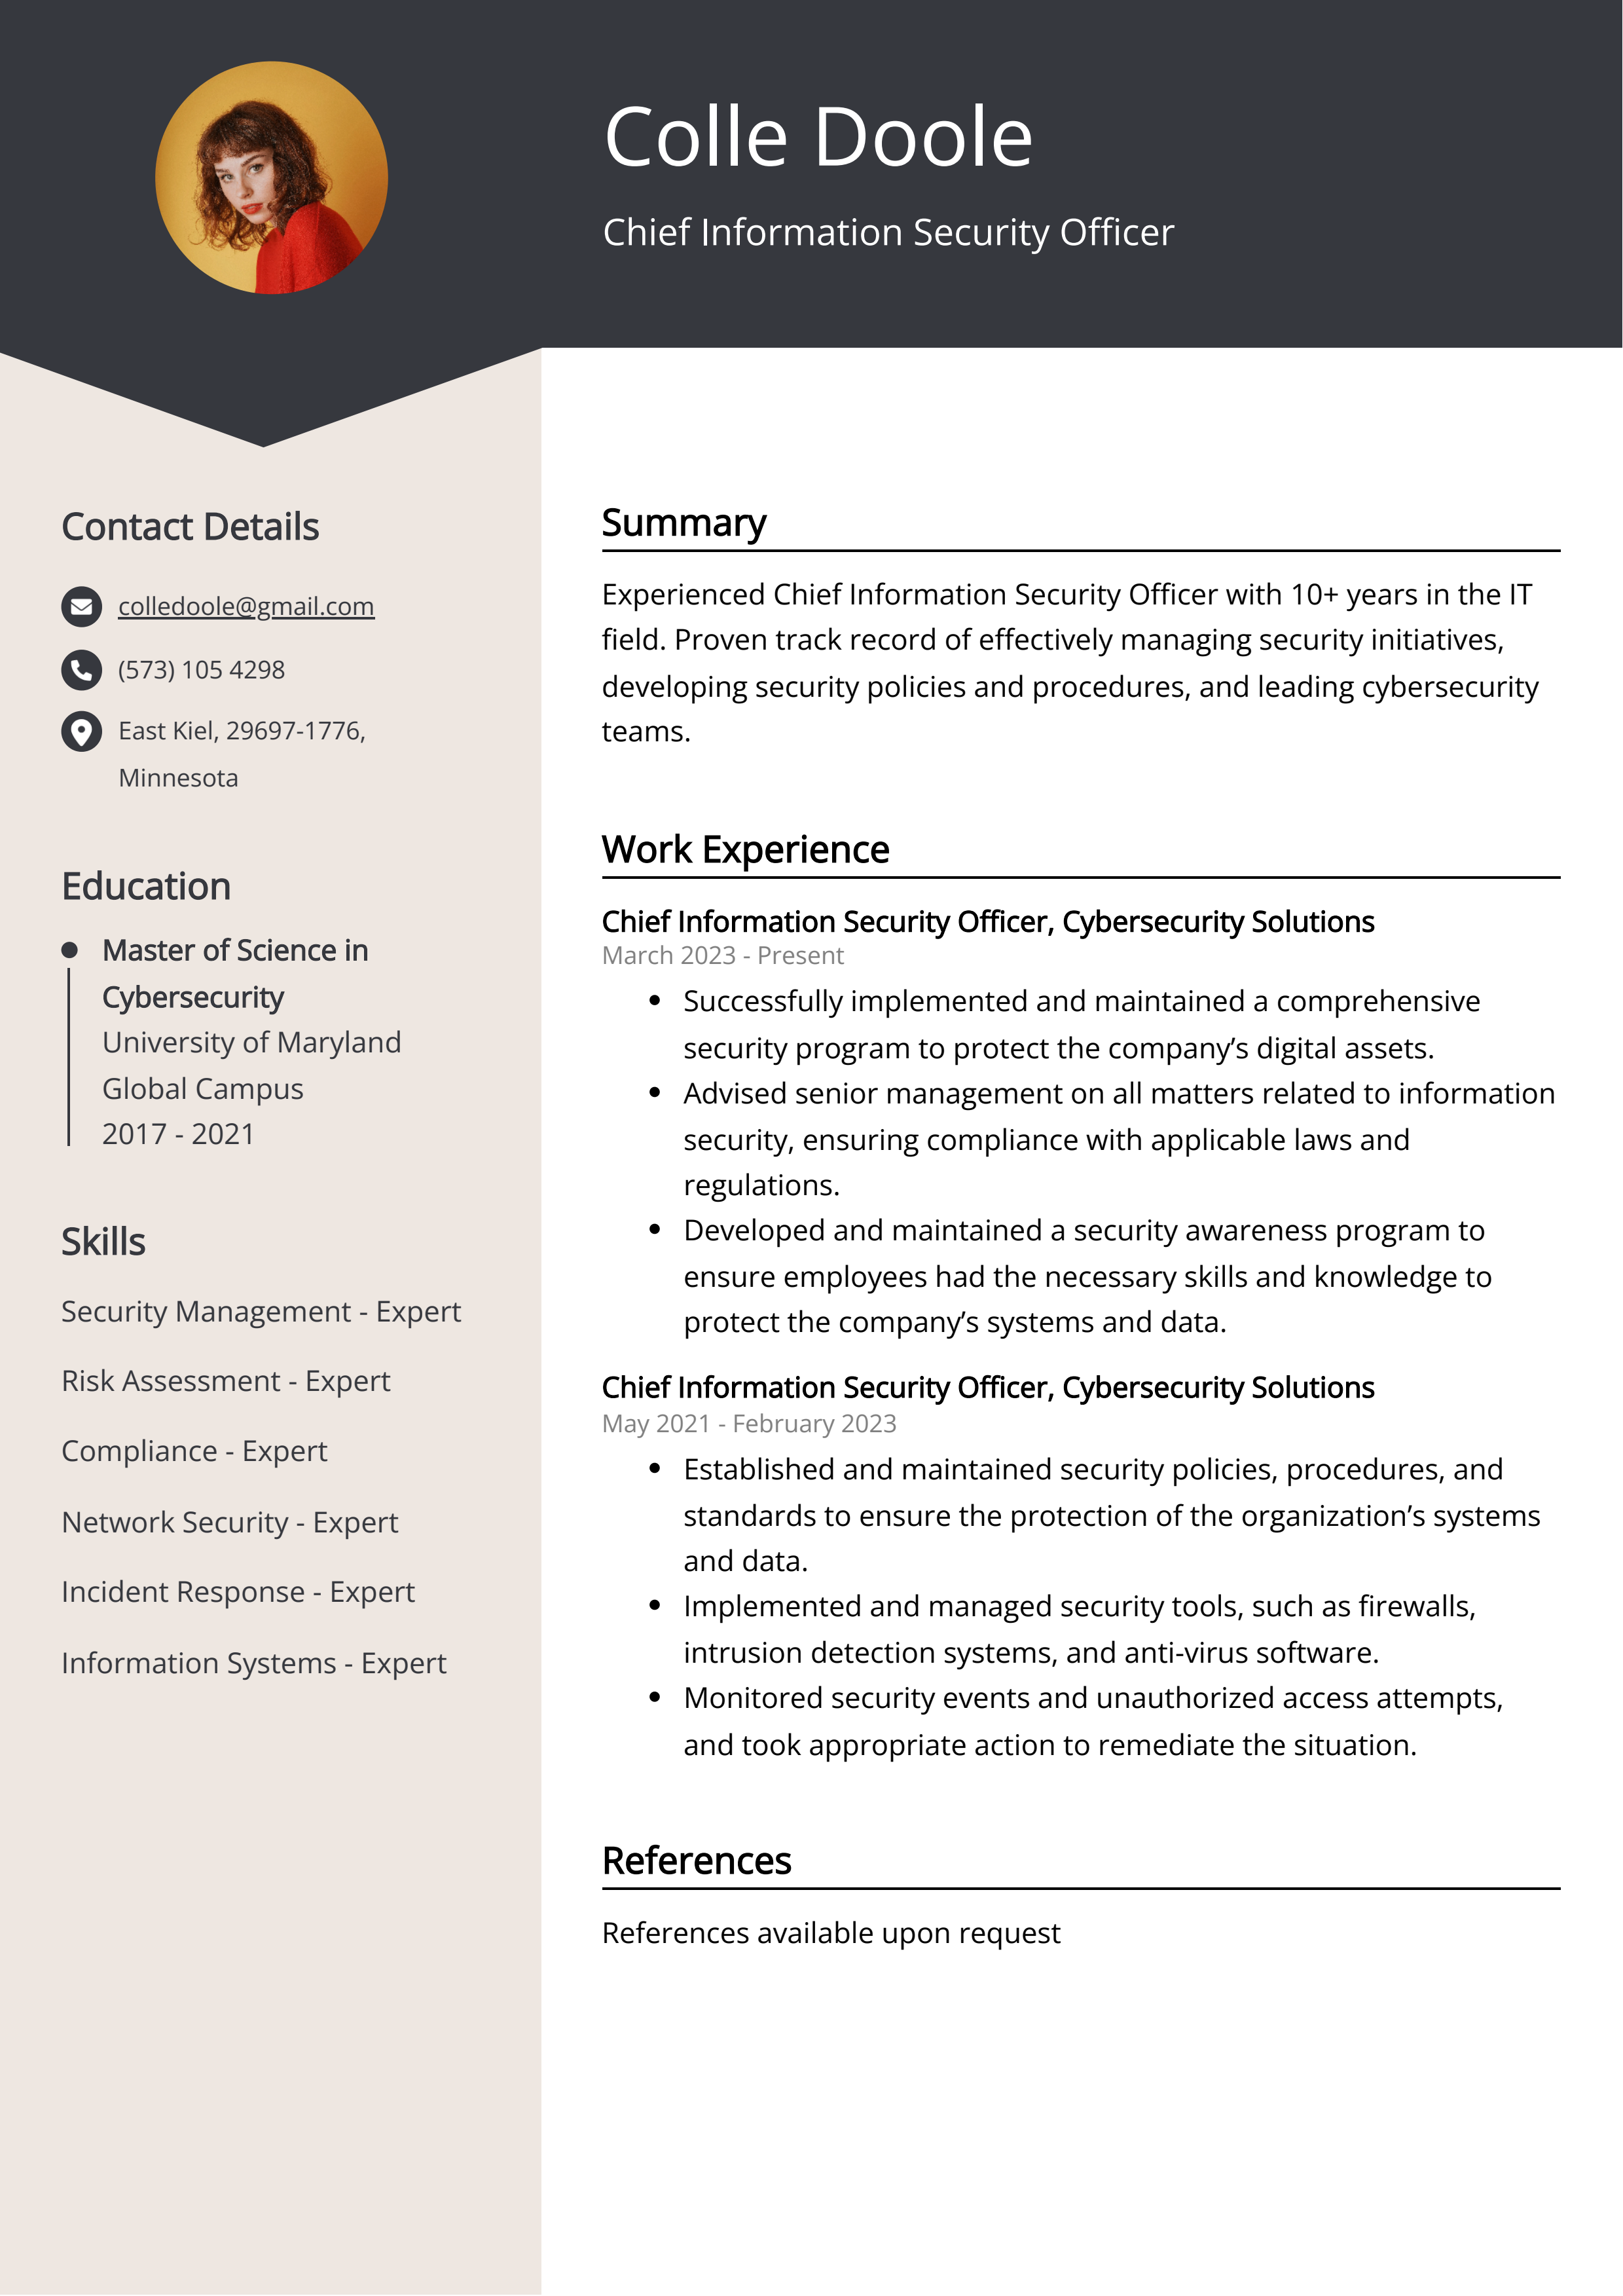 Chief Information Security Officer CV Example